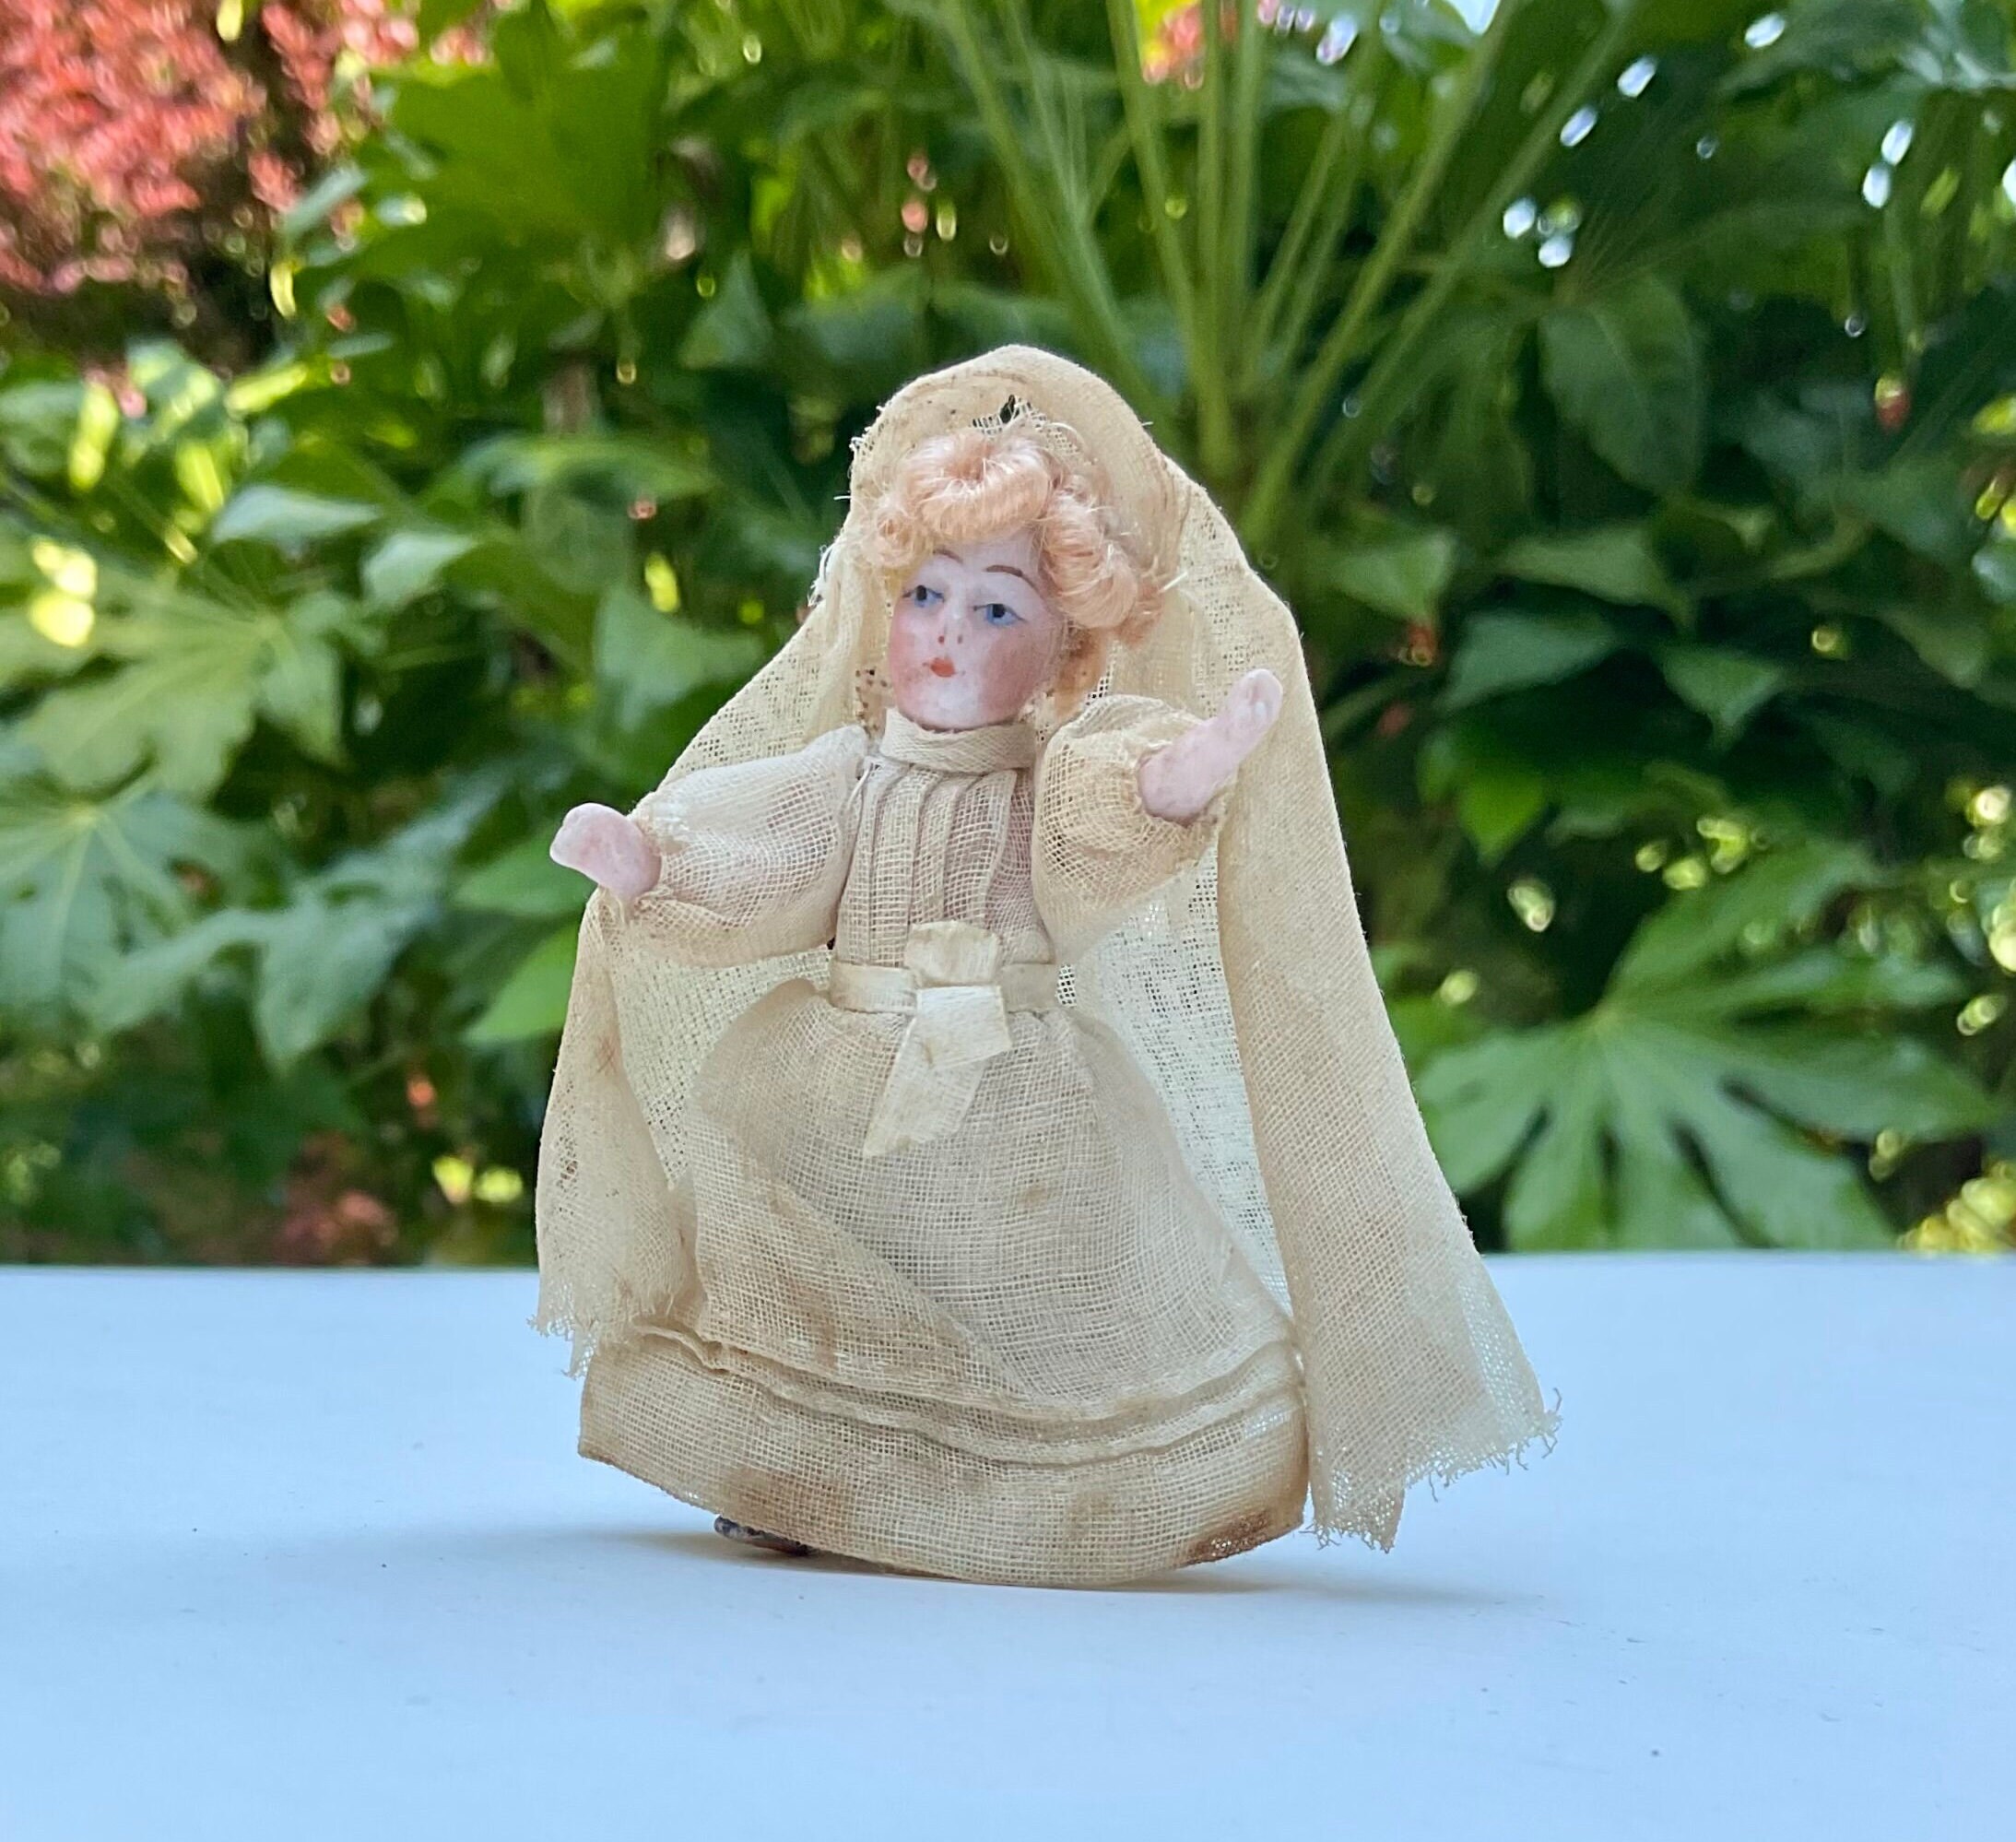 5 German all-bisque miniature doll, model 130, with pretty costume.  $300/400, Art, Antiques & Collectibles T…